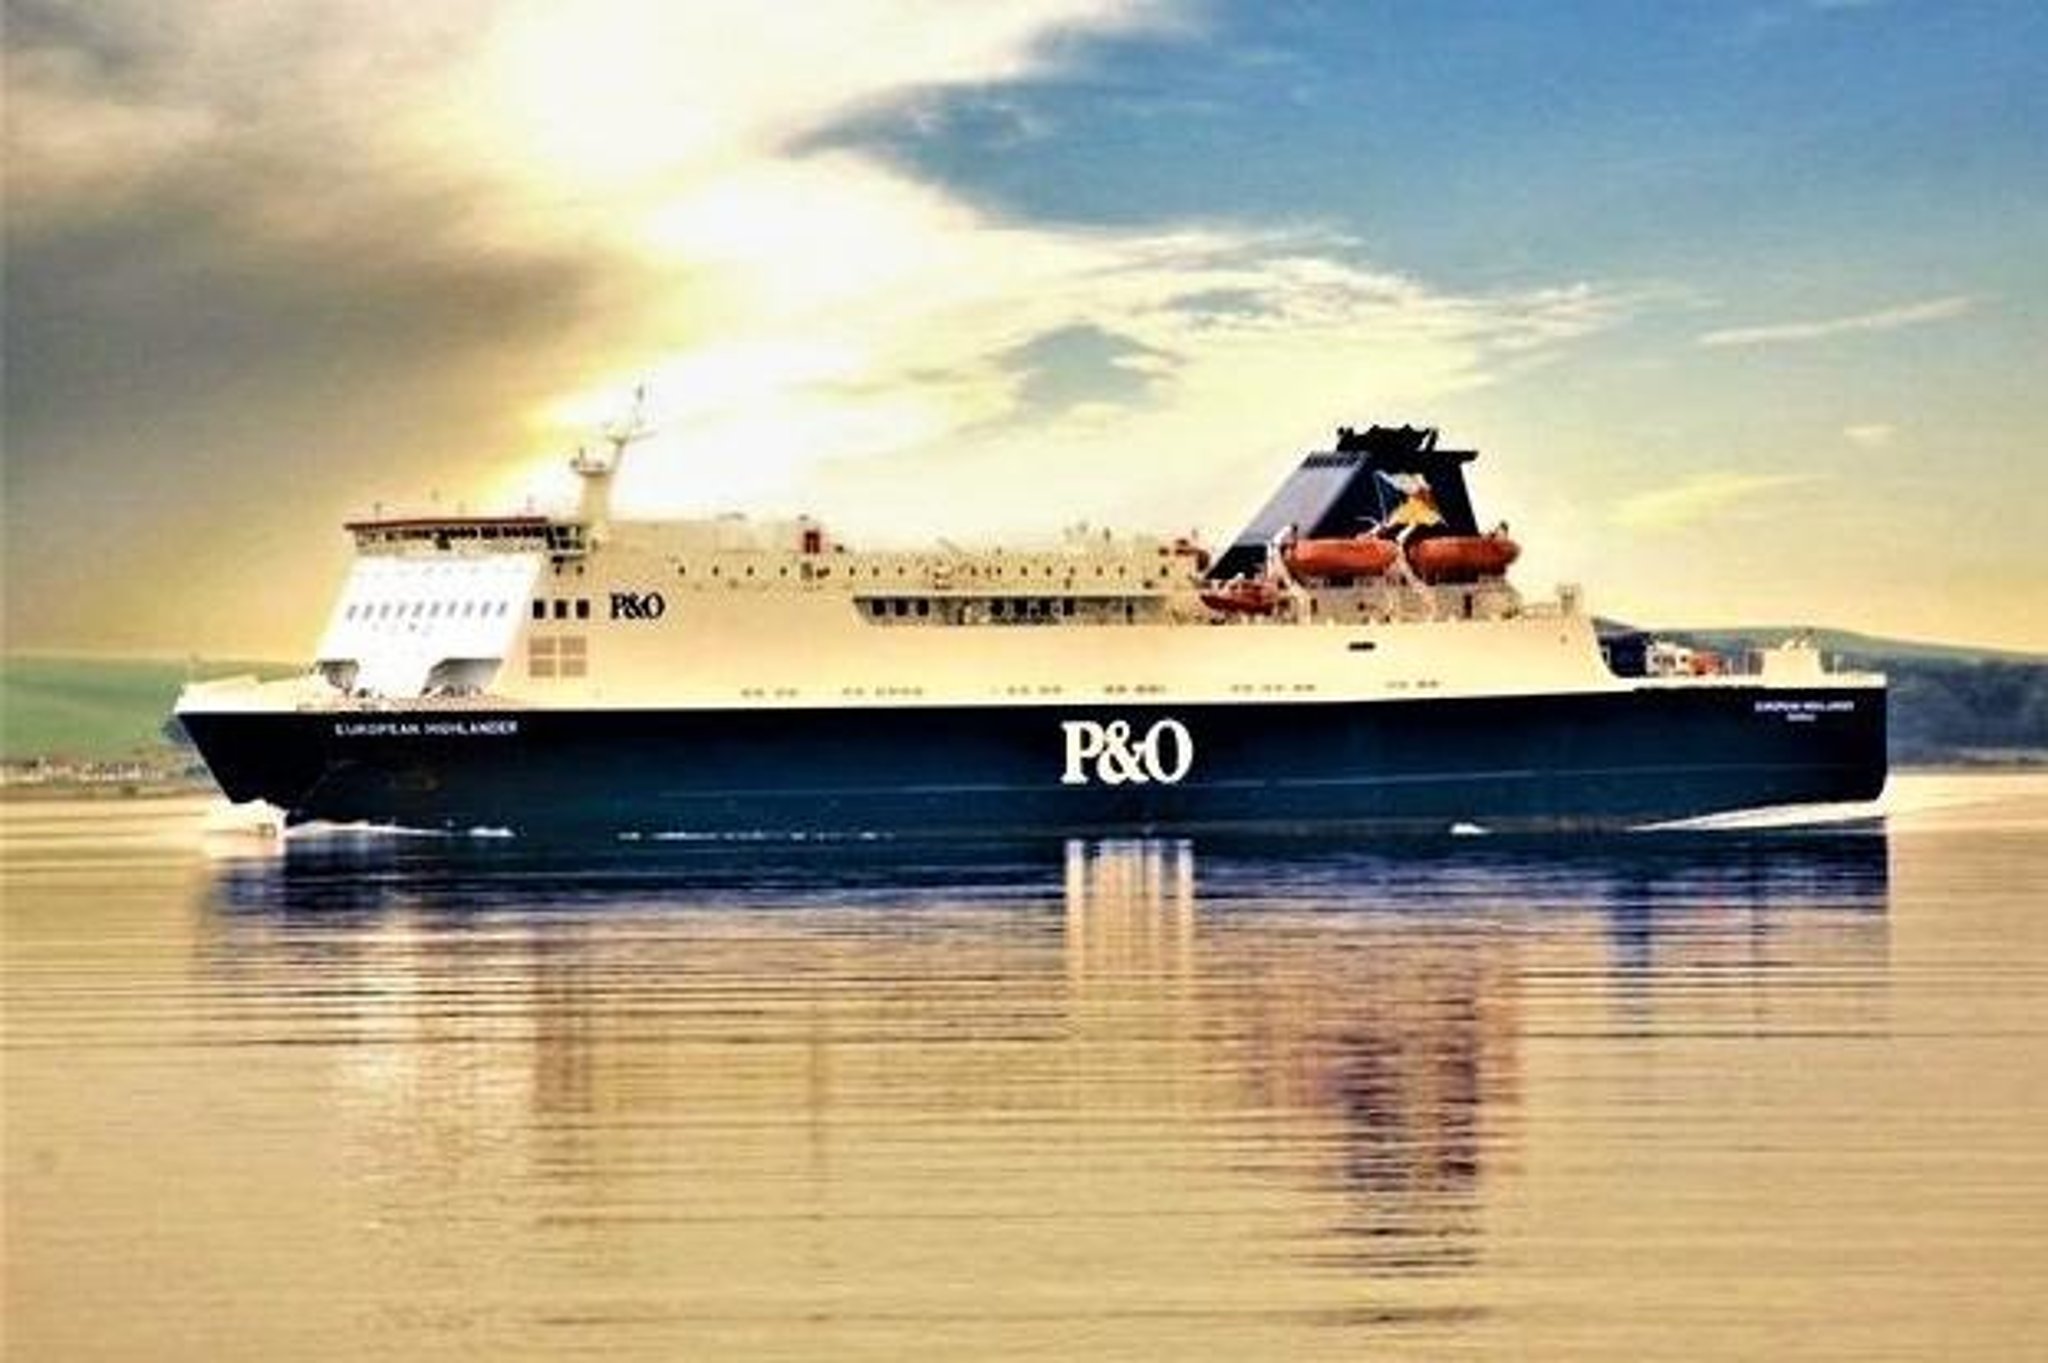 Poorly-kept lifeboats, engine issues, missing equipment: latest P&O ship defects